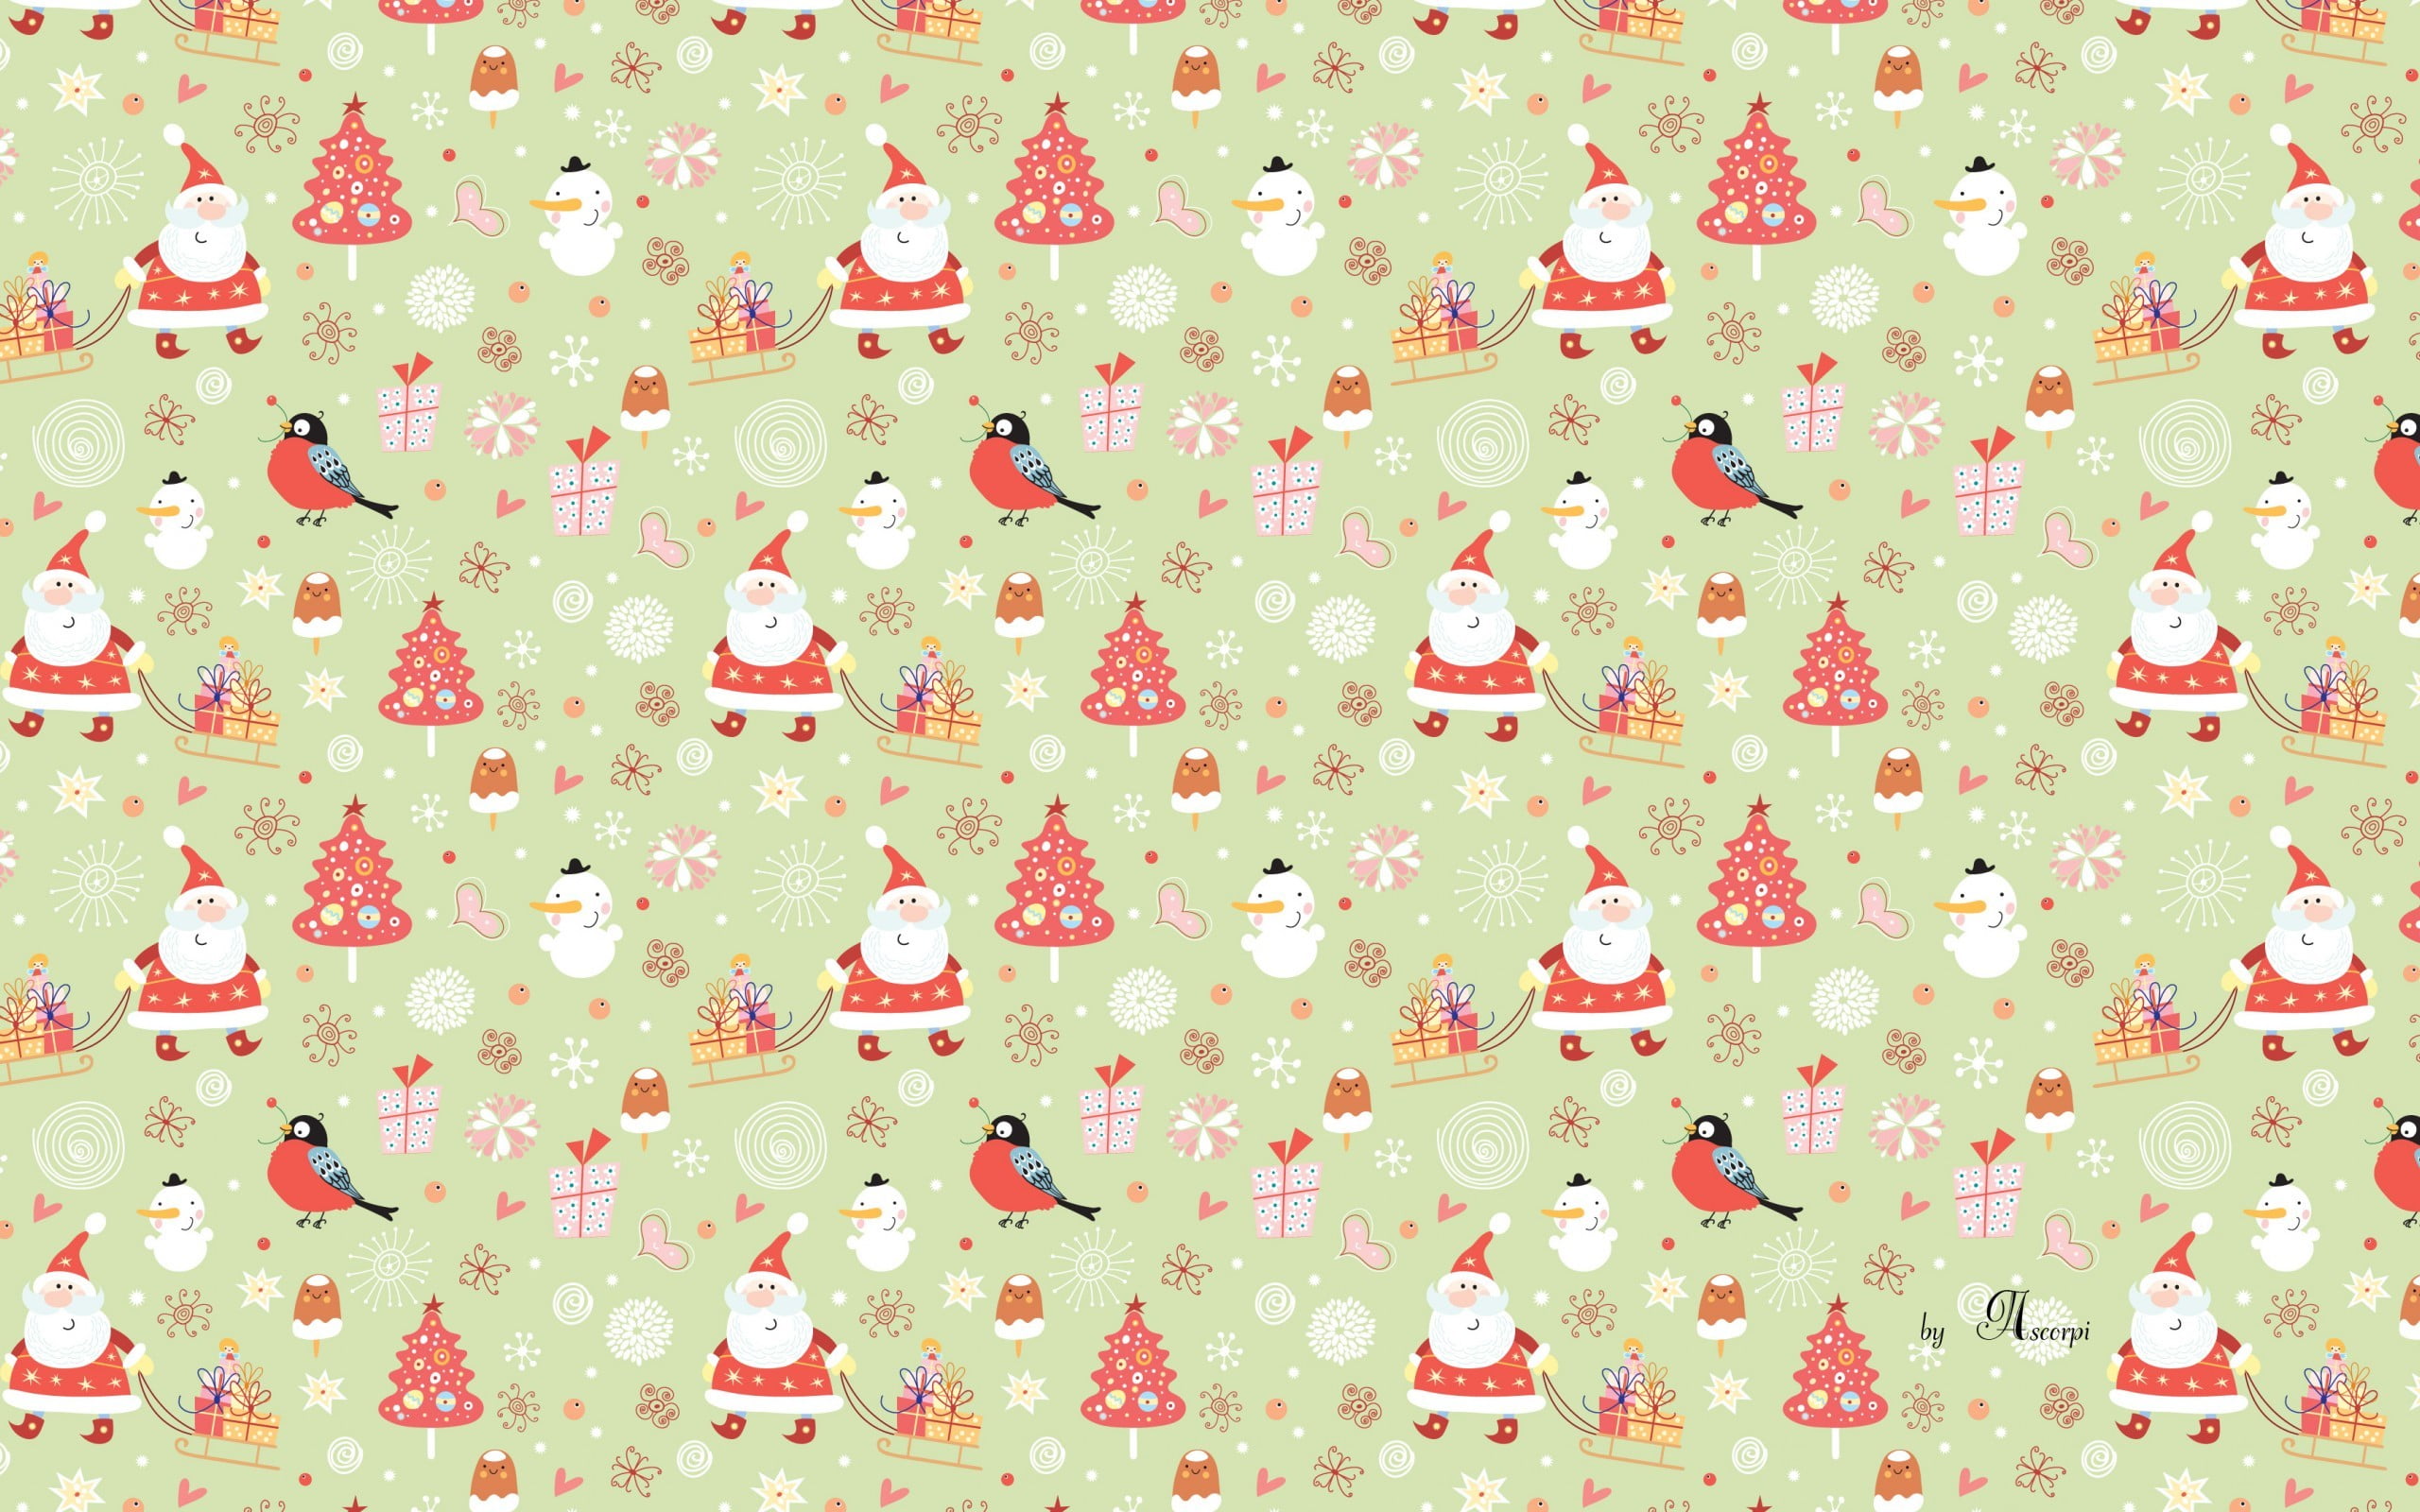 white, green, and red floral textile, Christmas, New Year